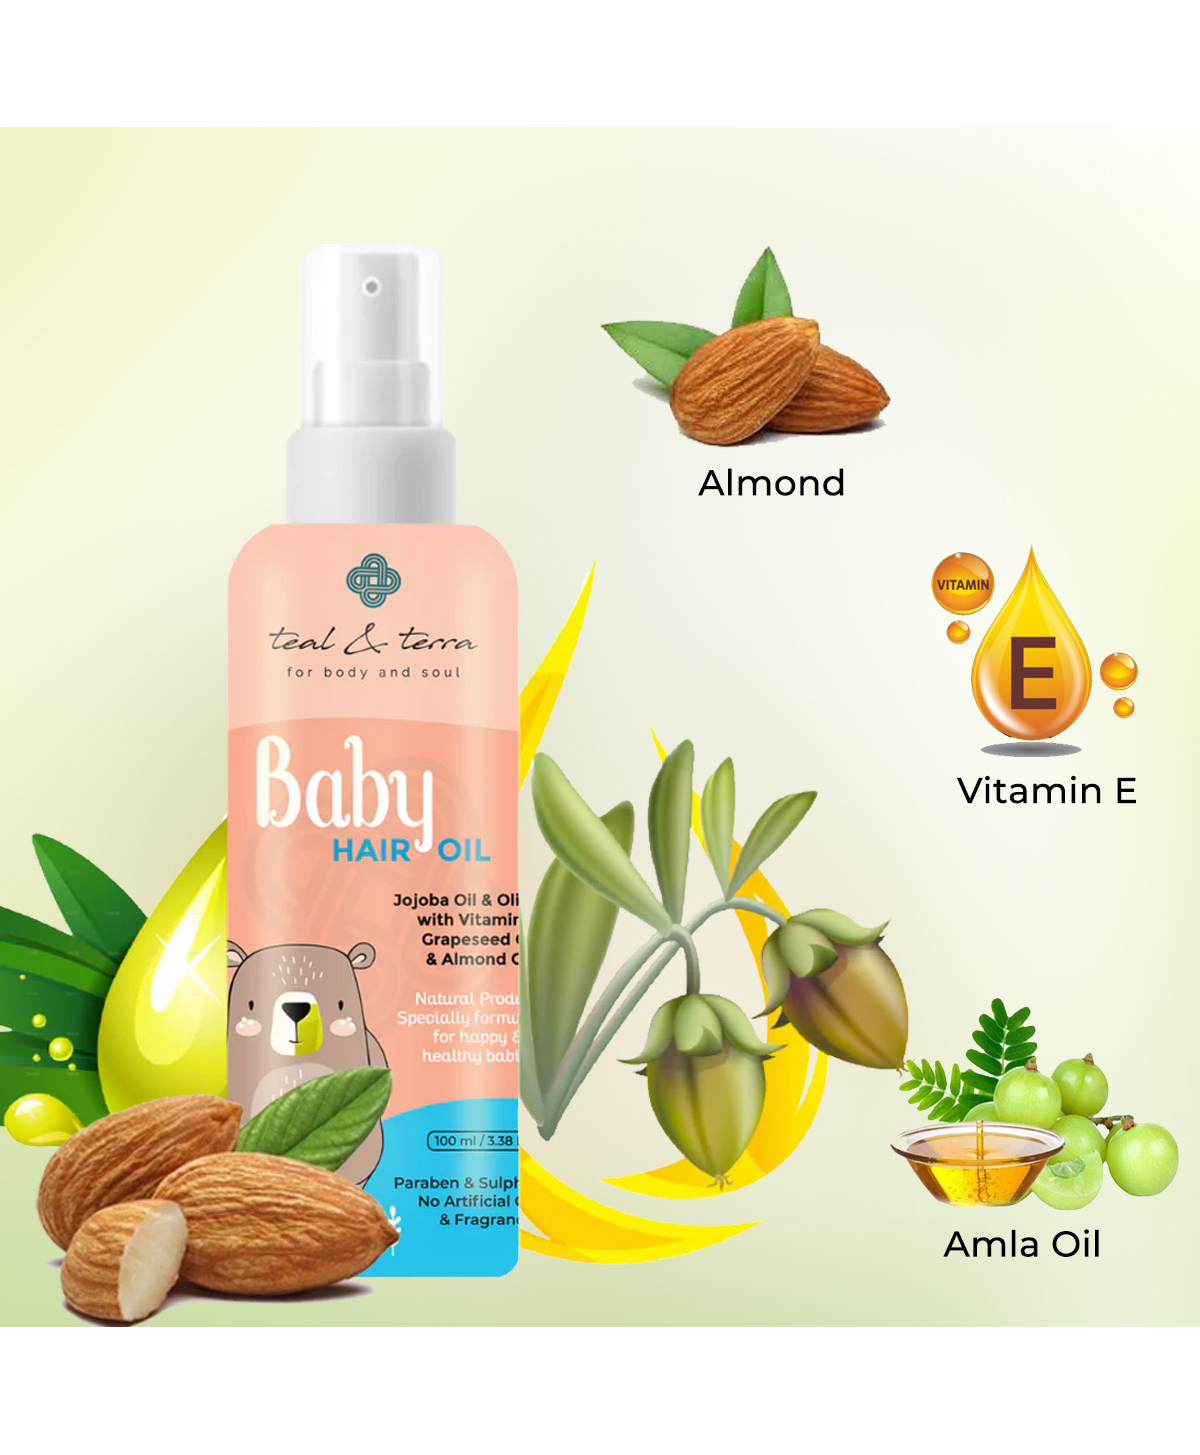 Teal & Terra Baby Hair Oil with Jojoba & Almond Oil - 100 ml Online in  India, Buy at Best Price from  - 9518462